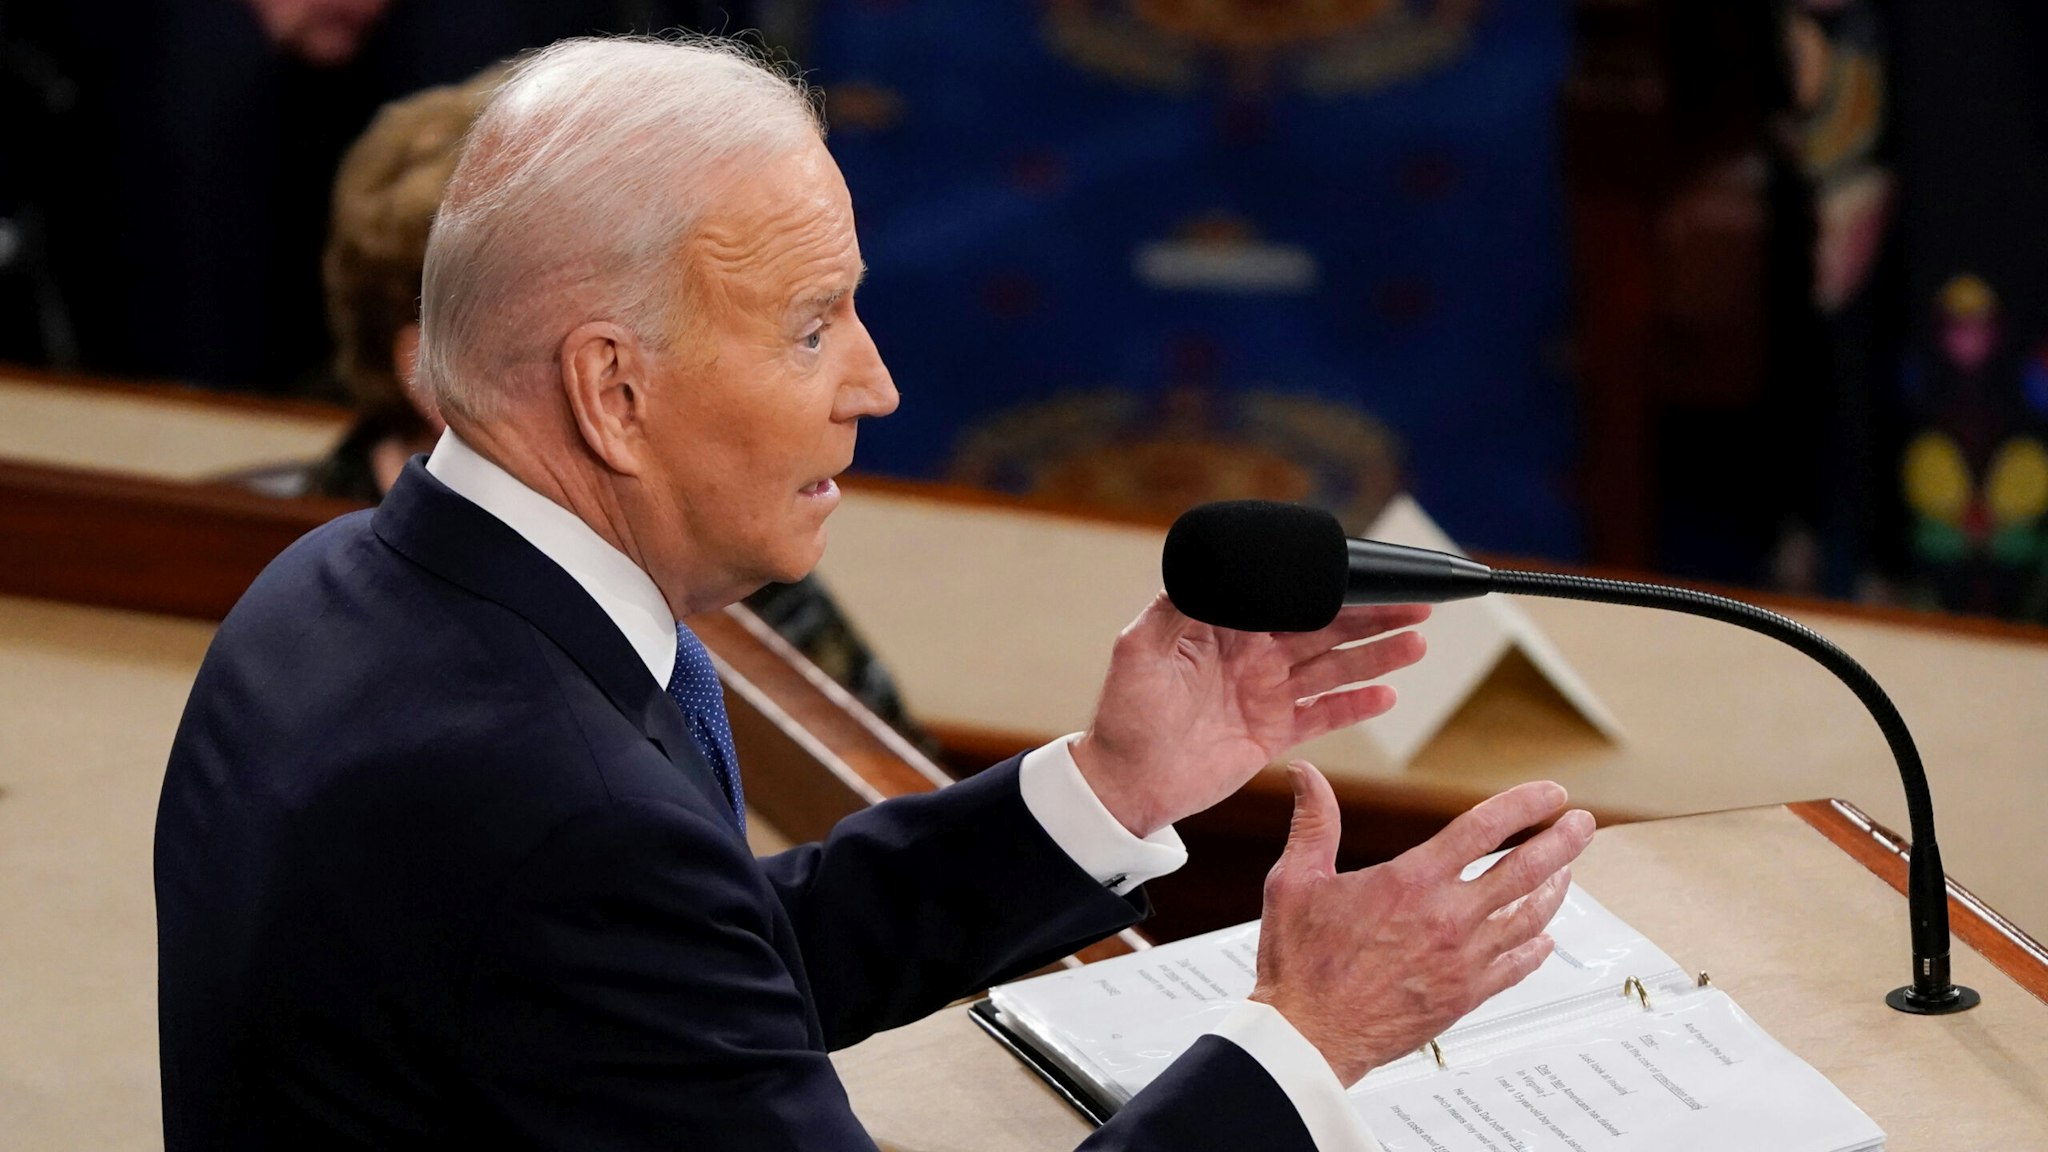 U.S. President Joe Biden speaks during a State of the Union address at the U.S. Capitol in Washington, D.C., U.S., on Tuesday, March 1, 2022. Biden's first State of the Union address comes against the backdrop of Russia's invasion of Ukraine and the subsequent sanctions placed on Russia by the U.S. and its allies.